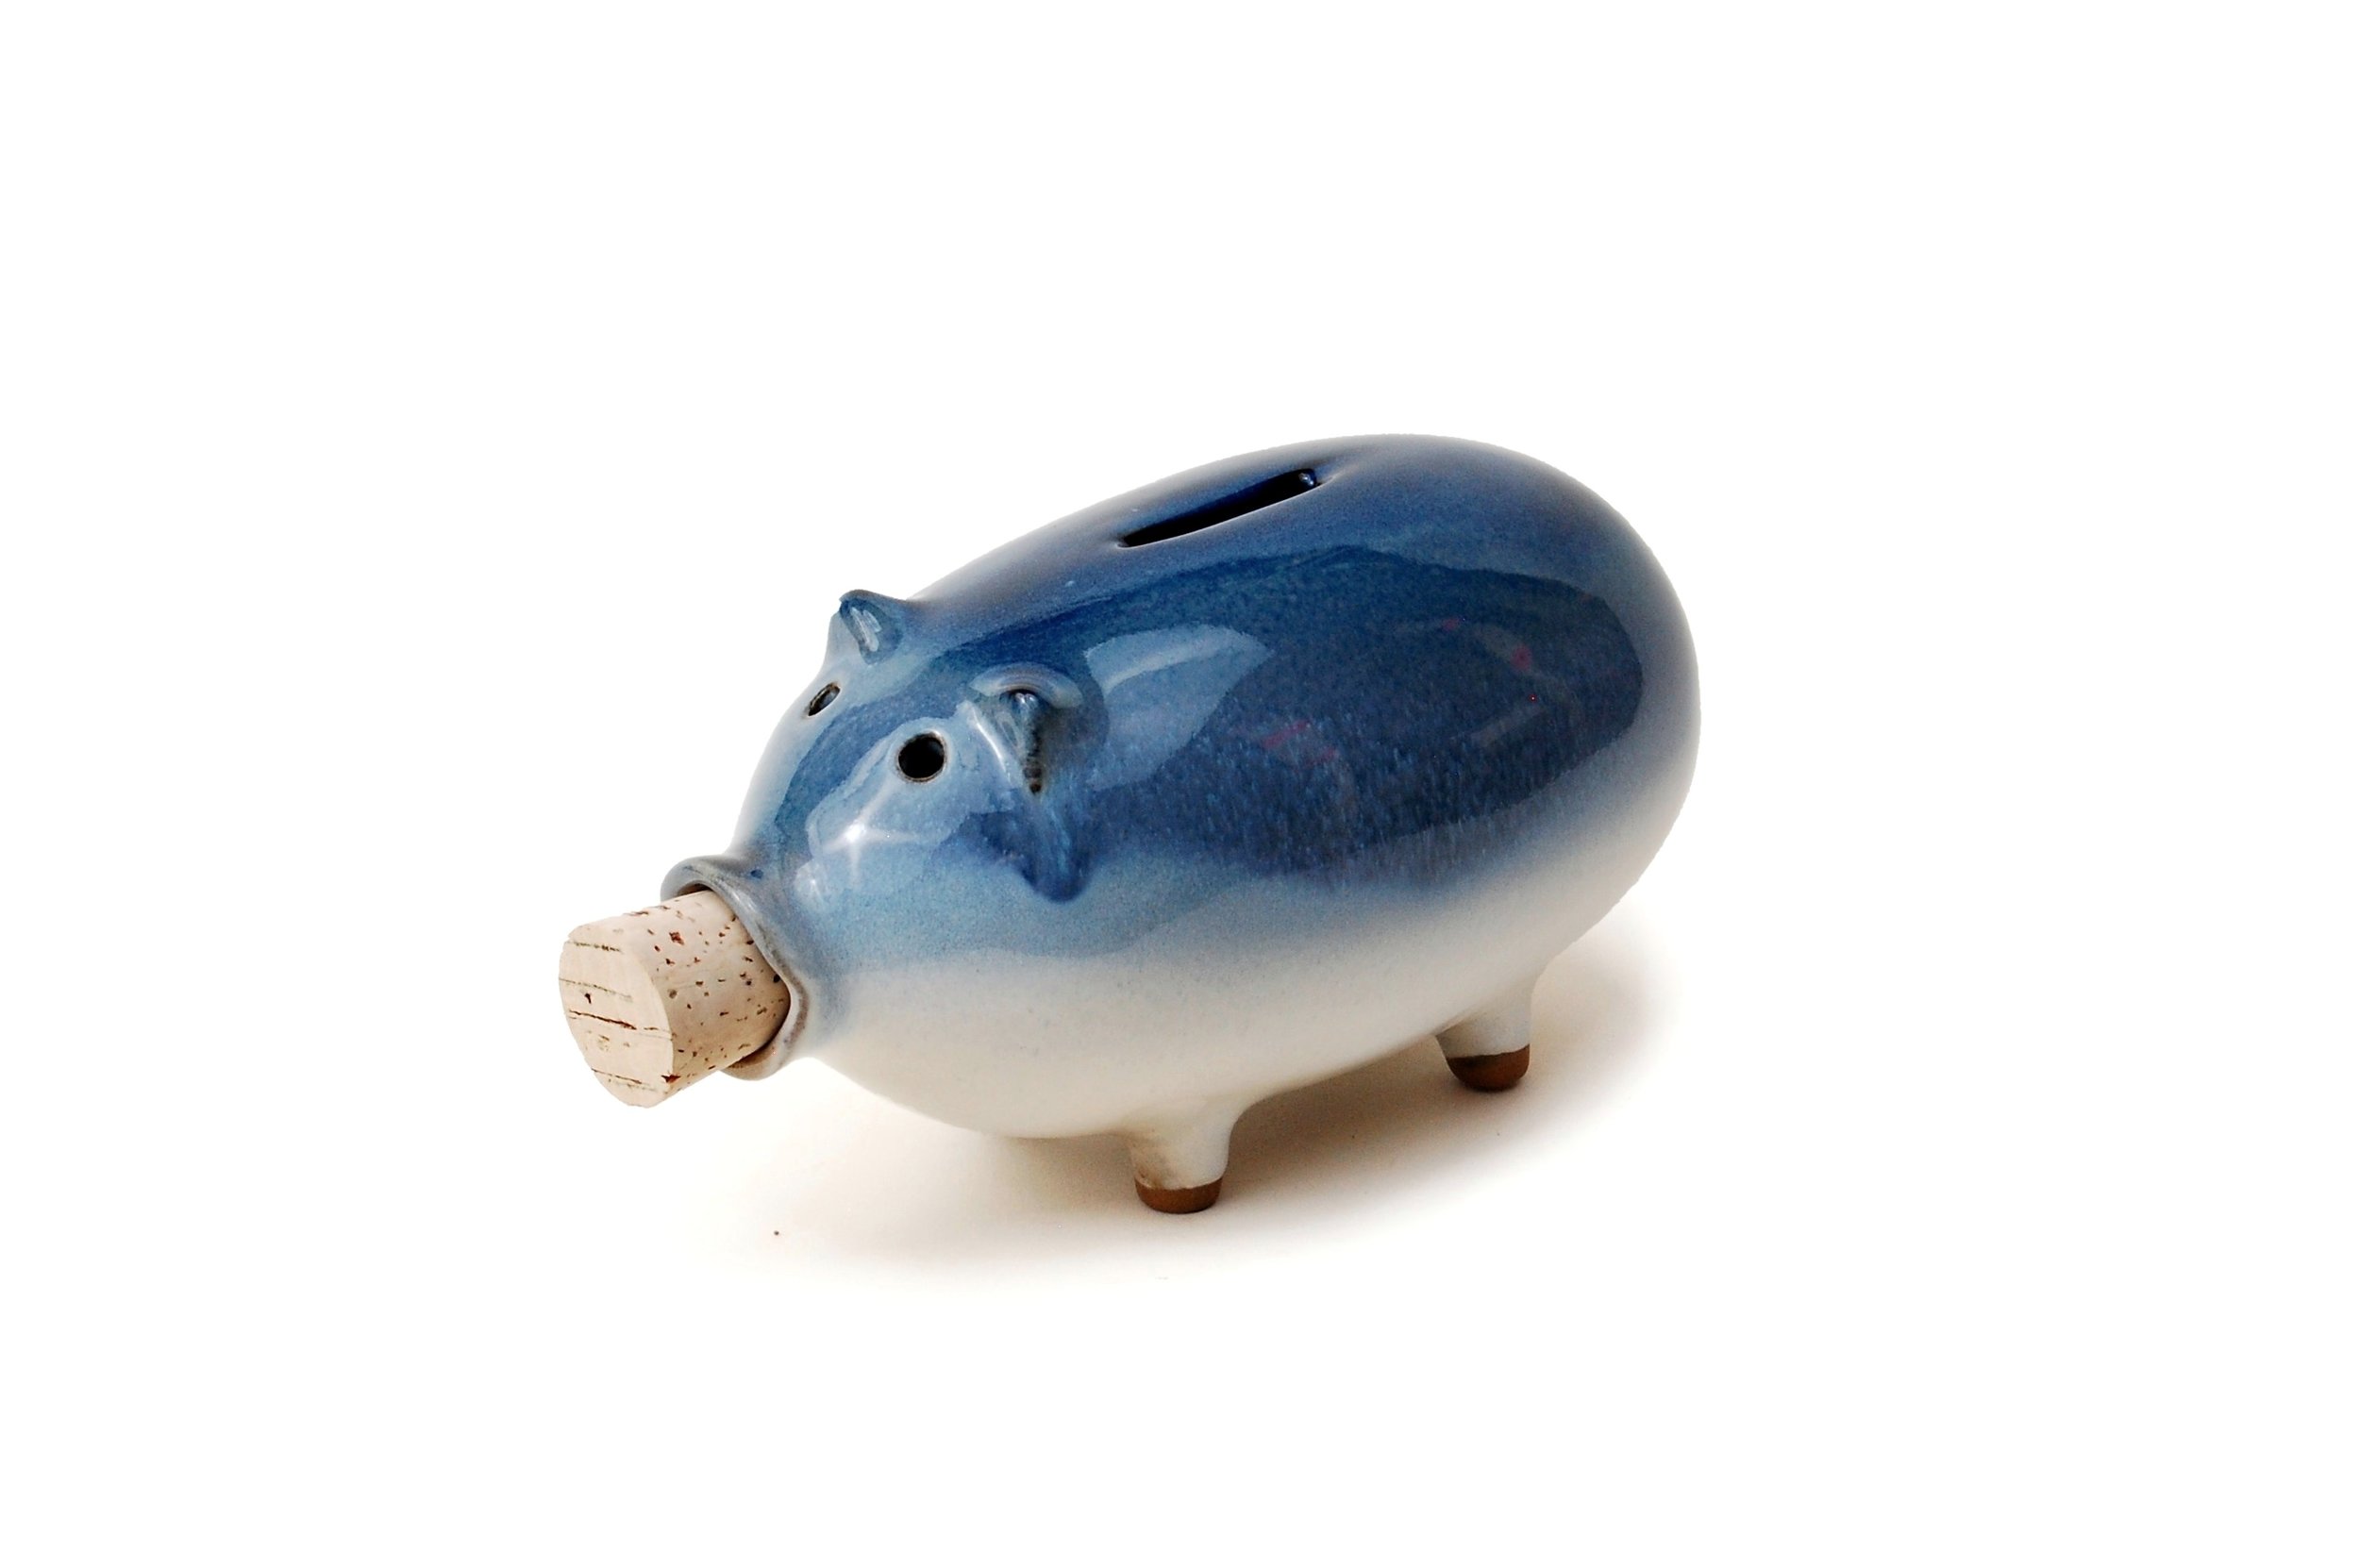 Where did piggy banks get their name from?